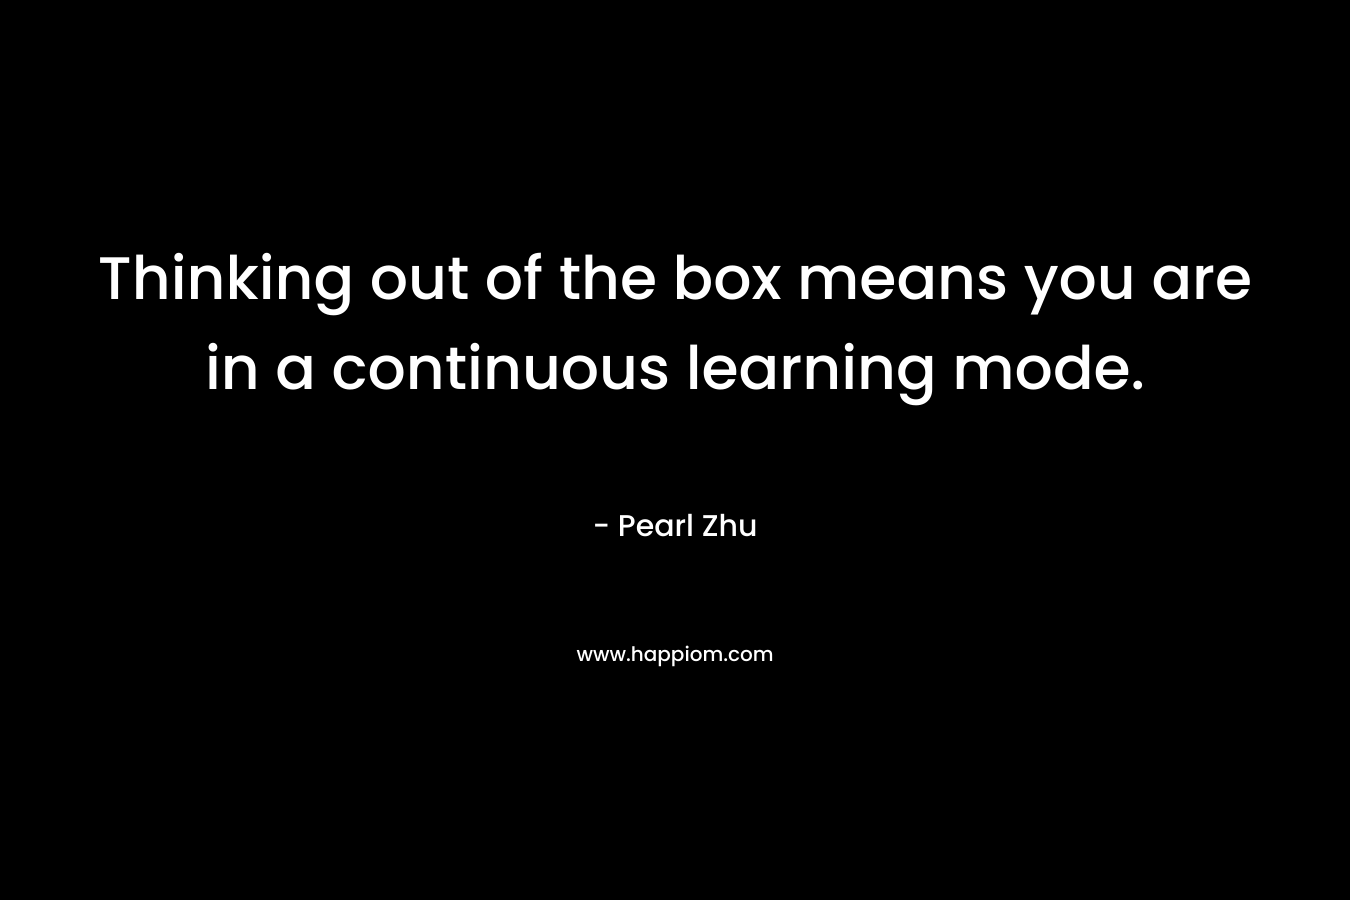 Thinking out of the box means you are in a continuous learning mode.